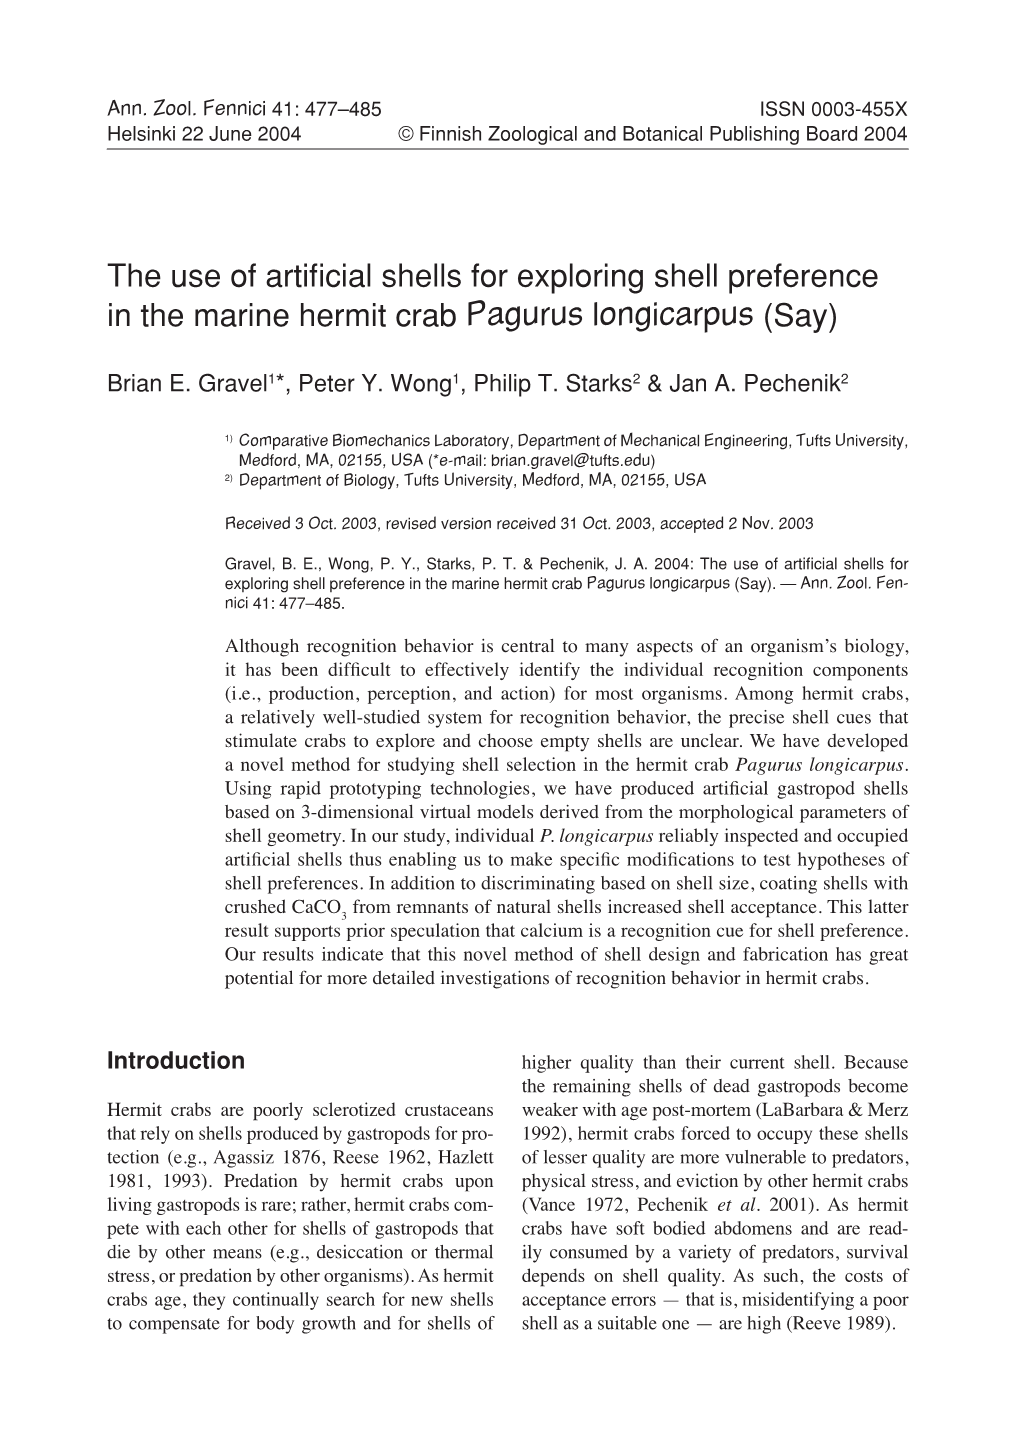 The Use of Artificial Shells for Exploring Shell Preference in the Marine